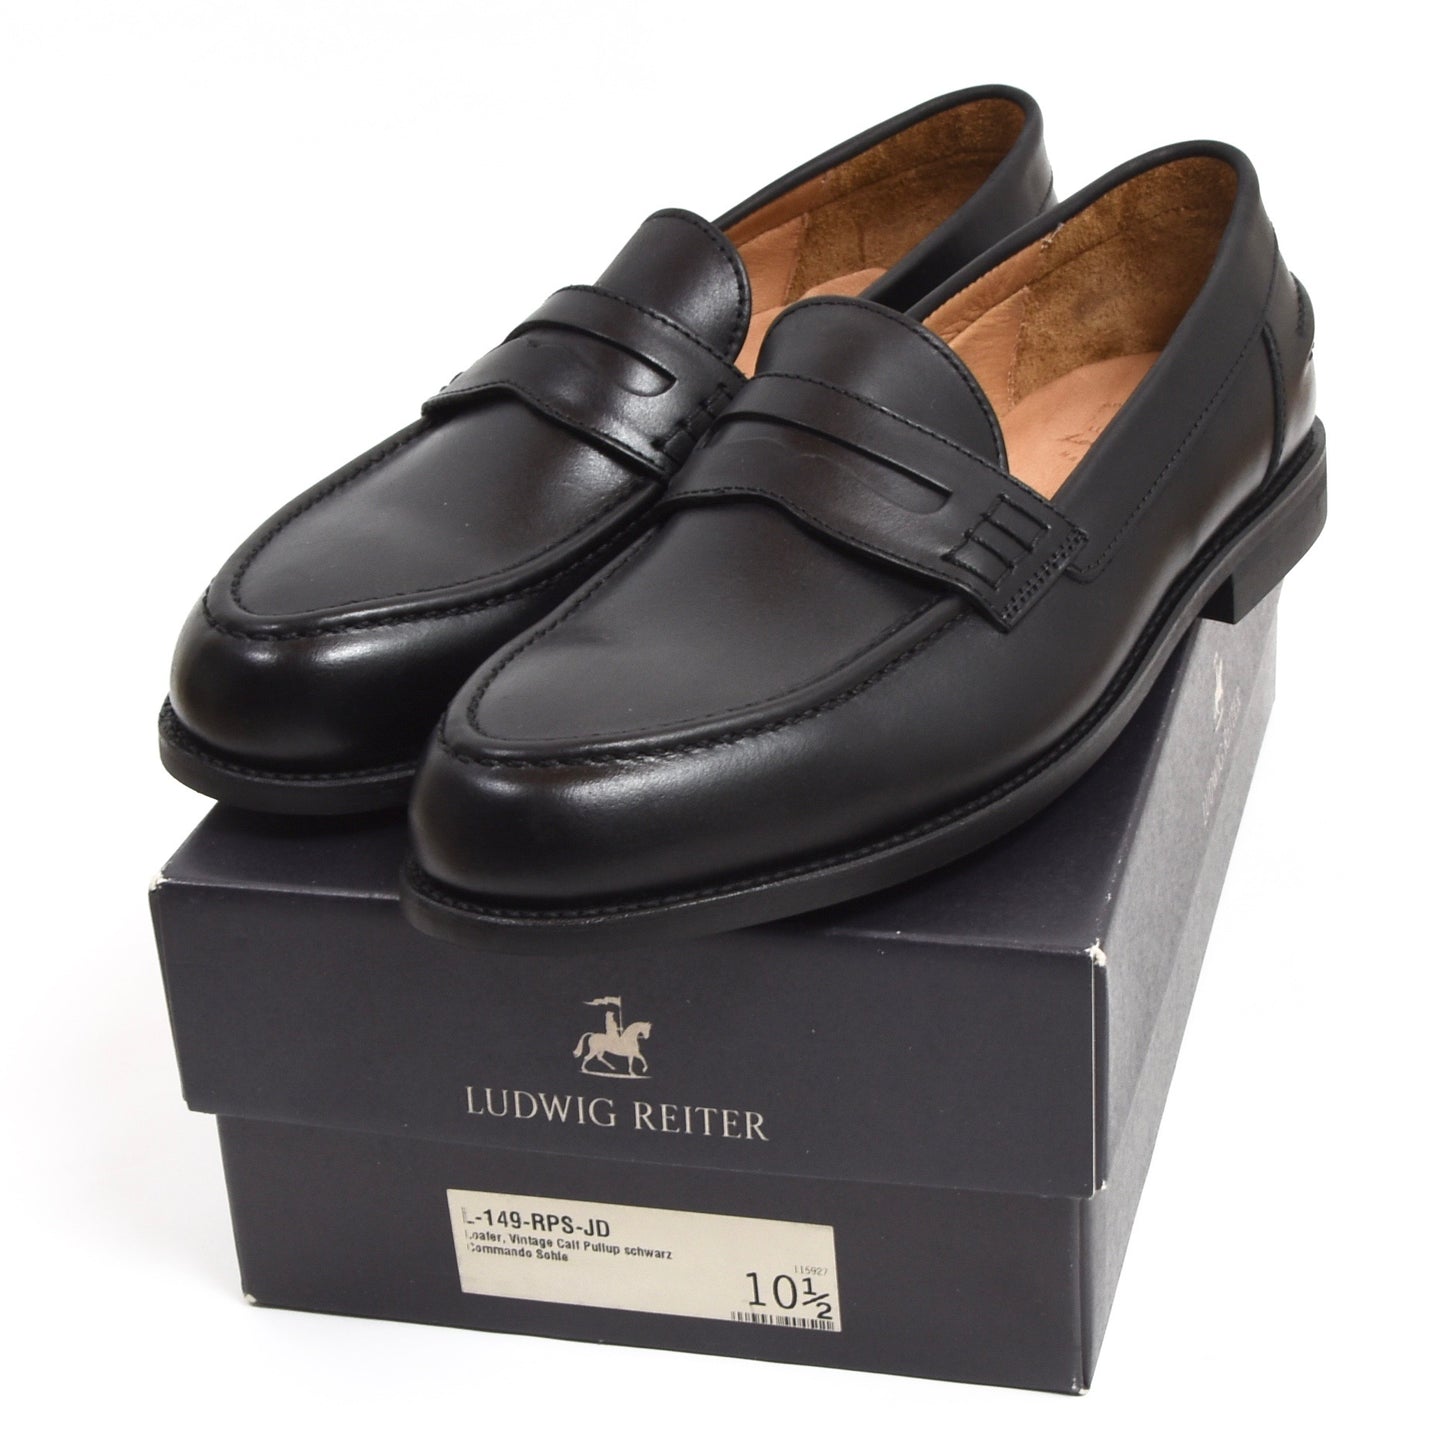 NEW Ludwig Reiter Leisure Class Loafers Size 10.5 - Black